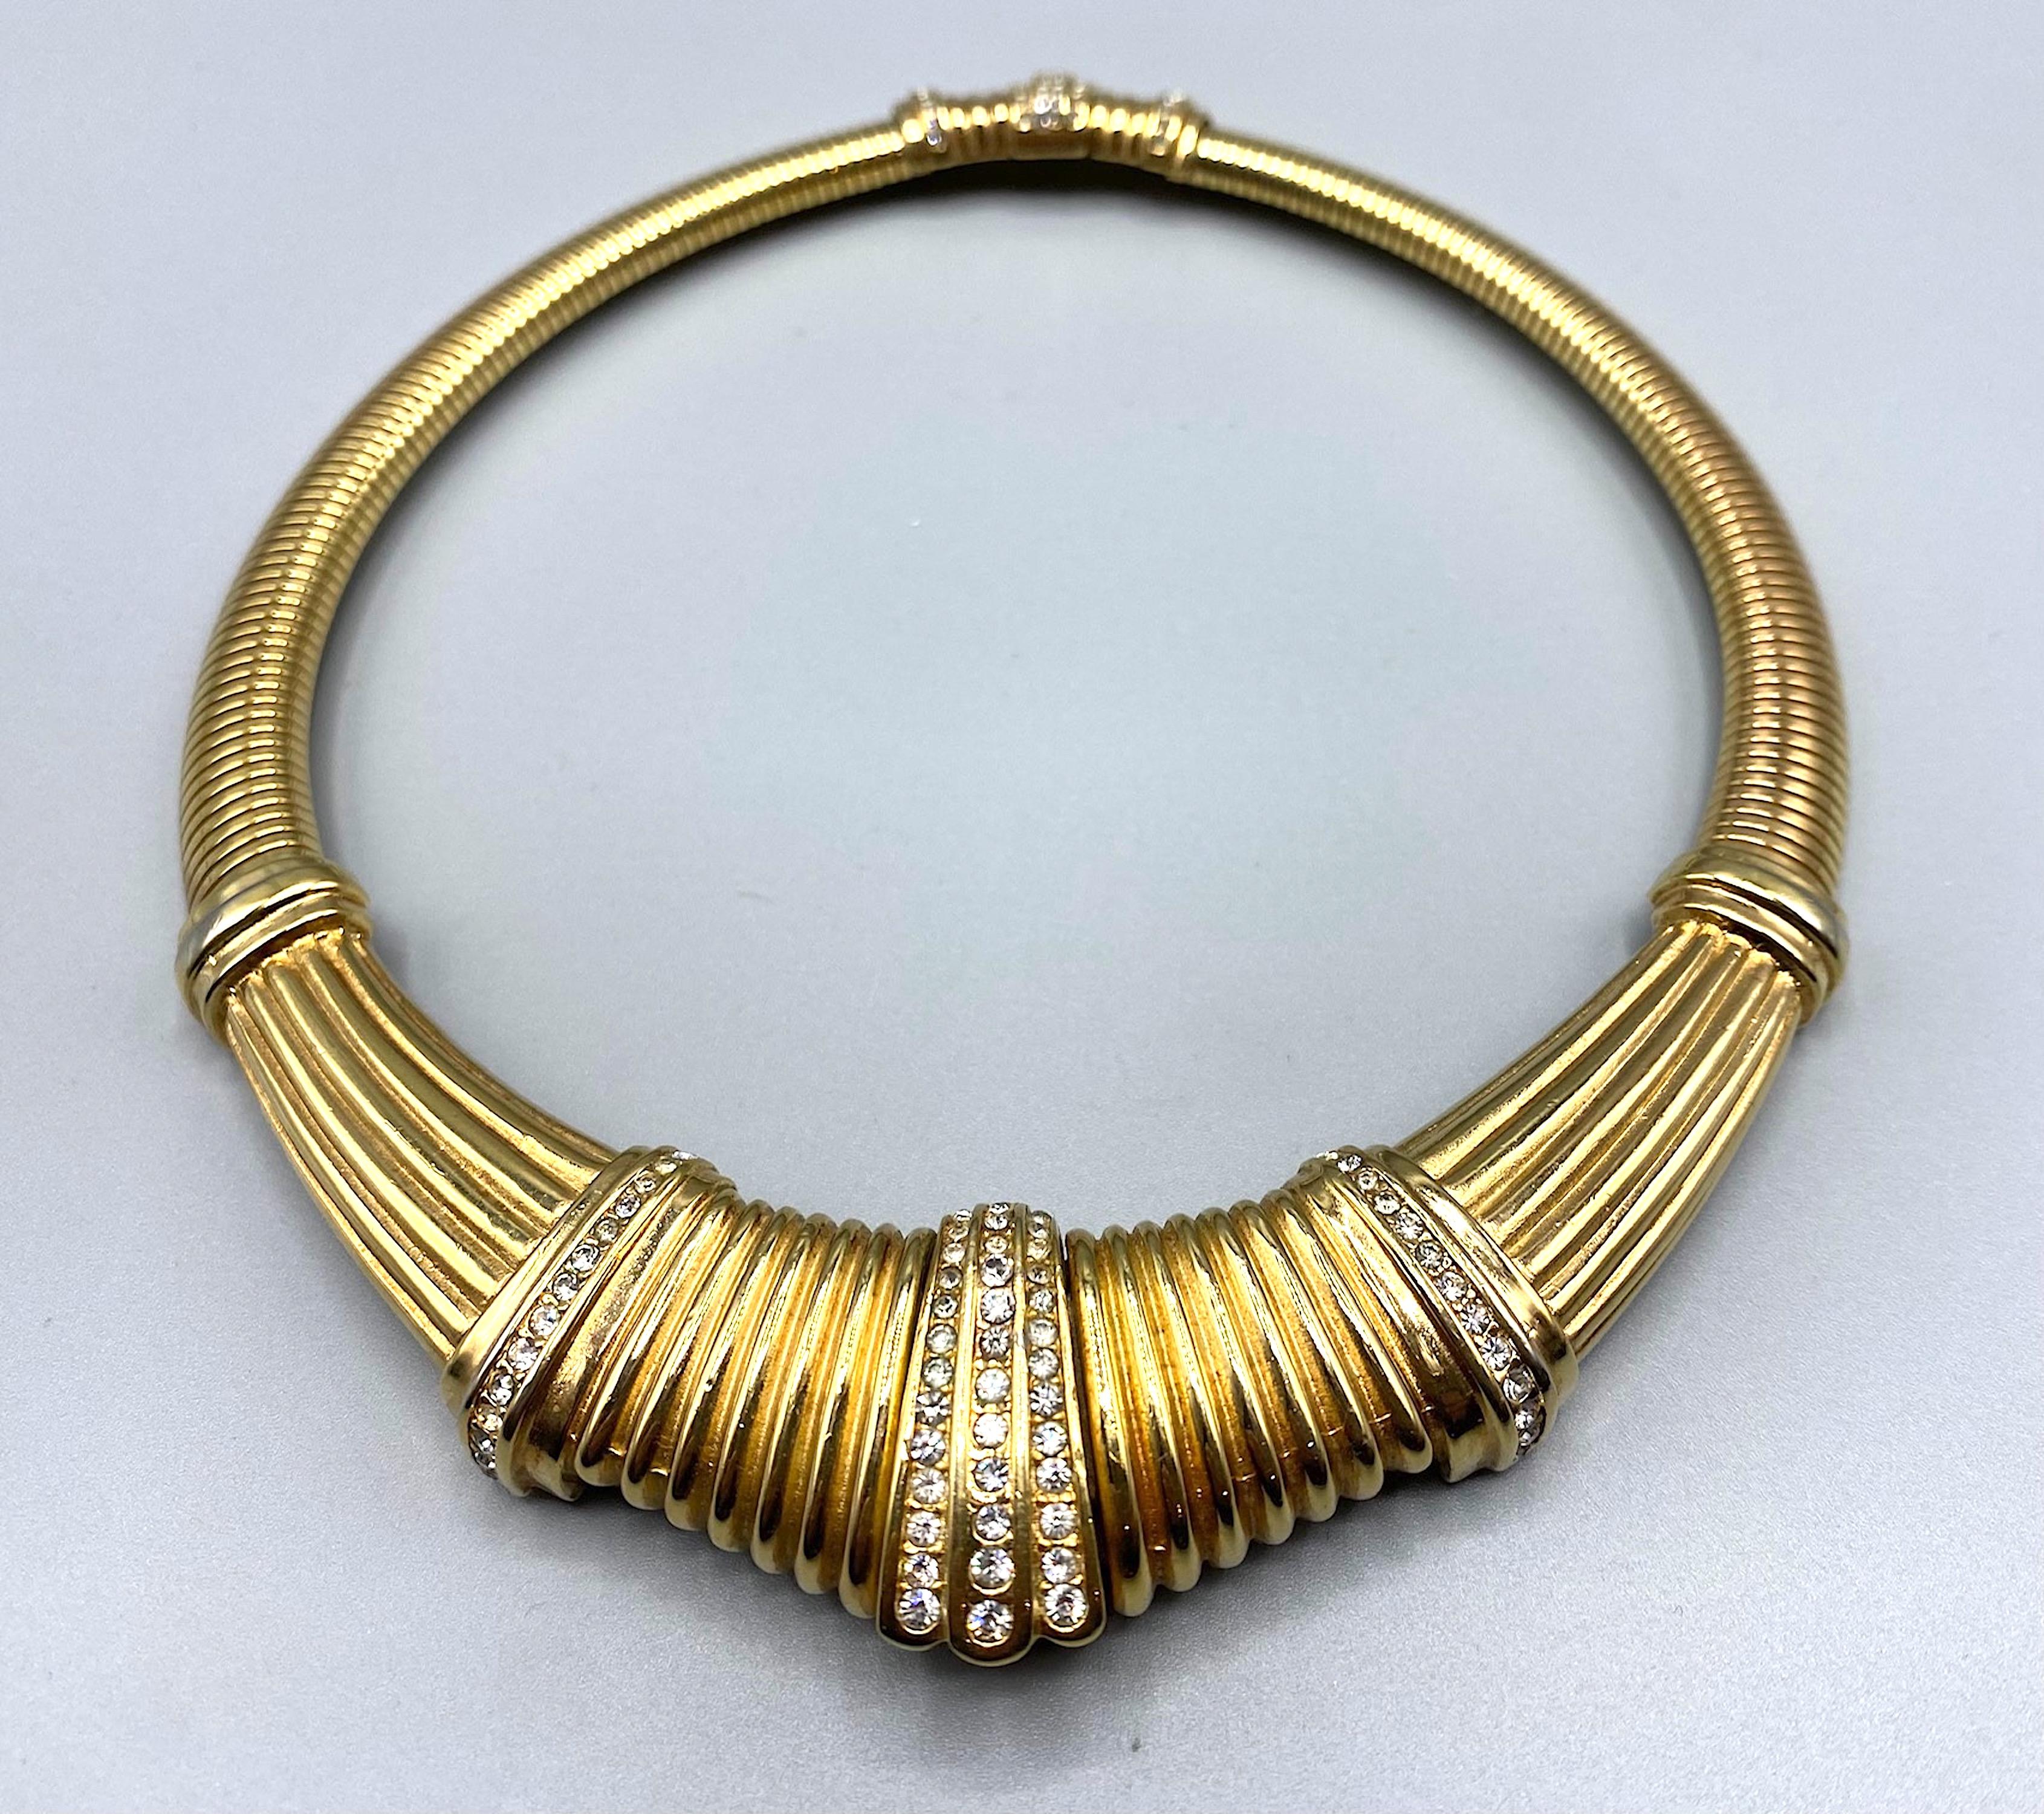 Art Deco Christian Dior Made in Germany Omega Gold Necklace with Rigid Geometrical Center